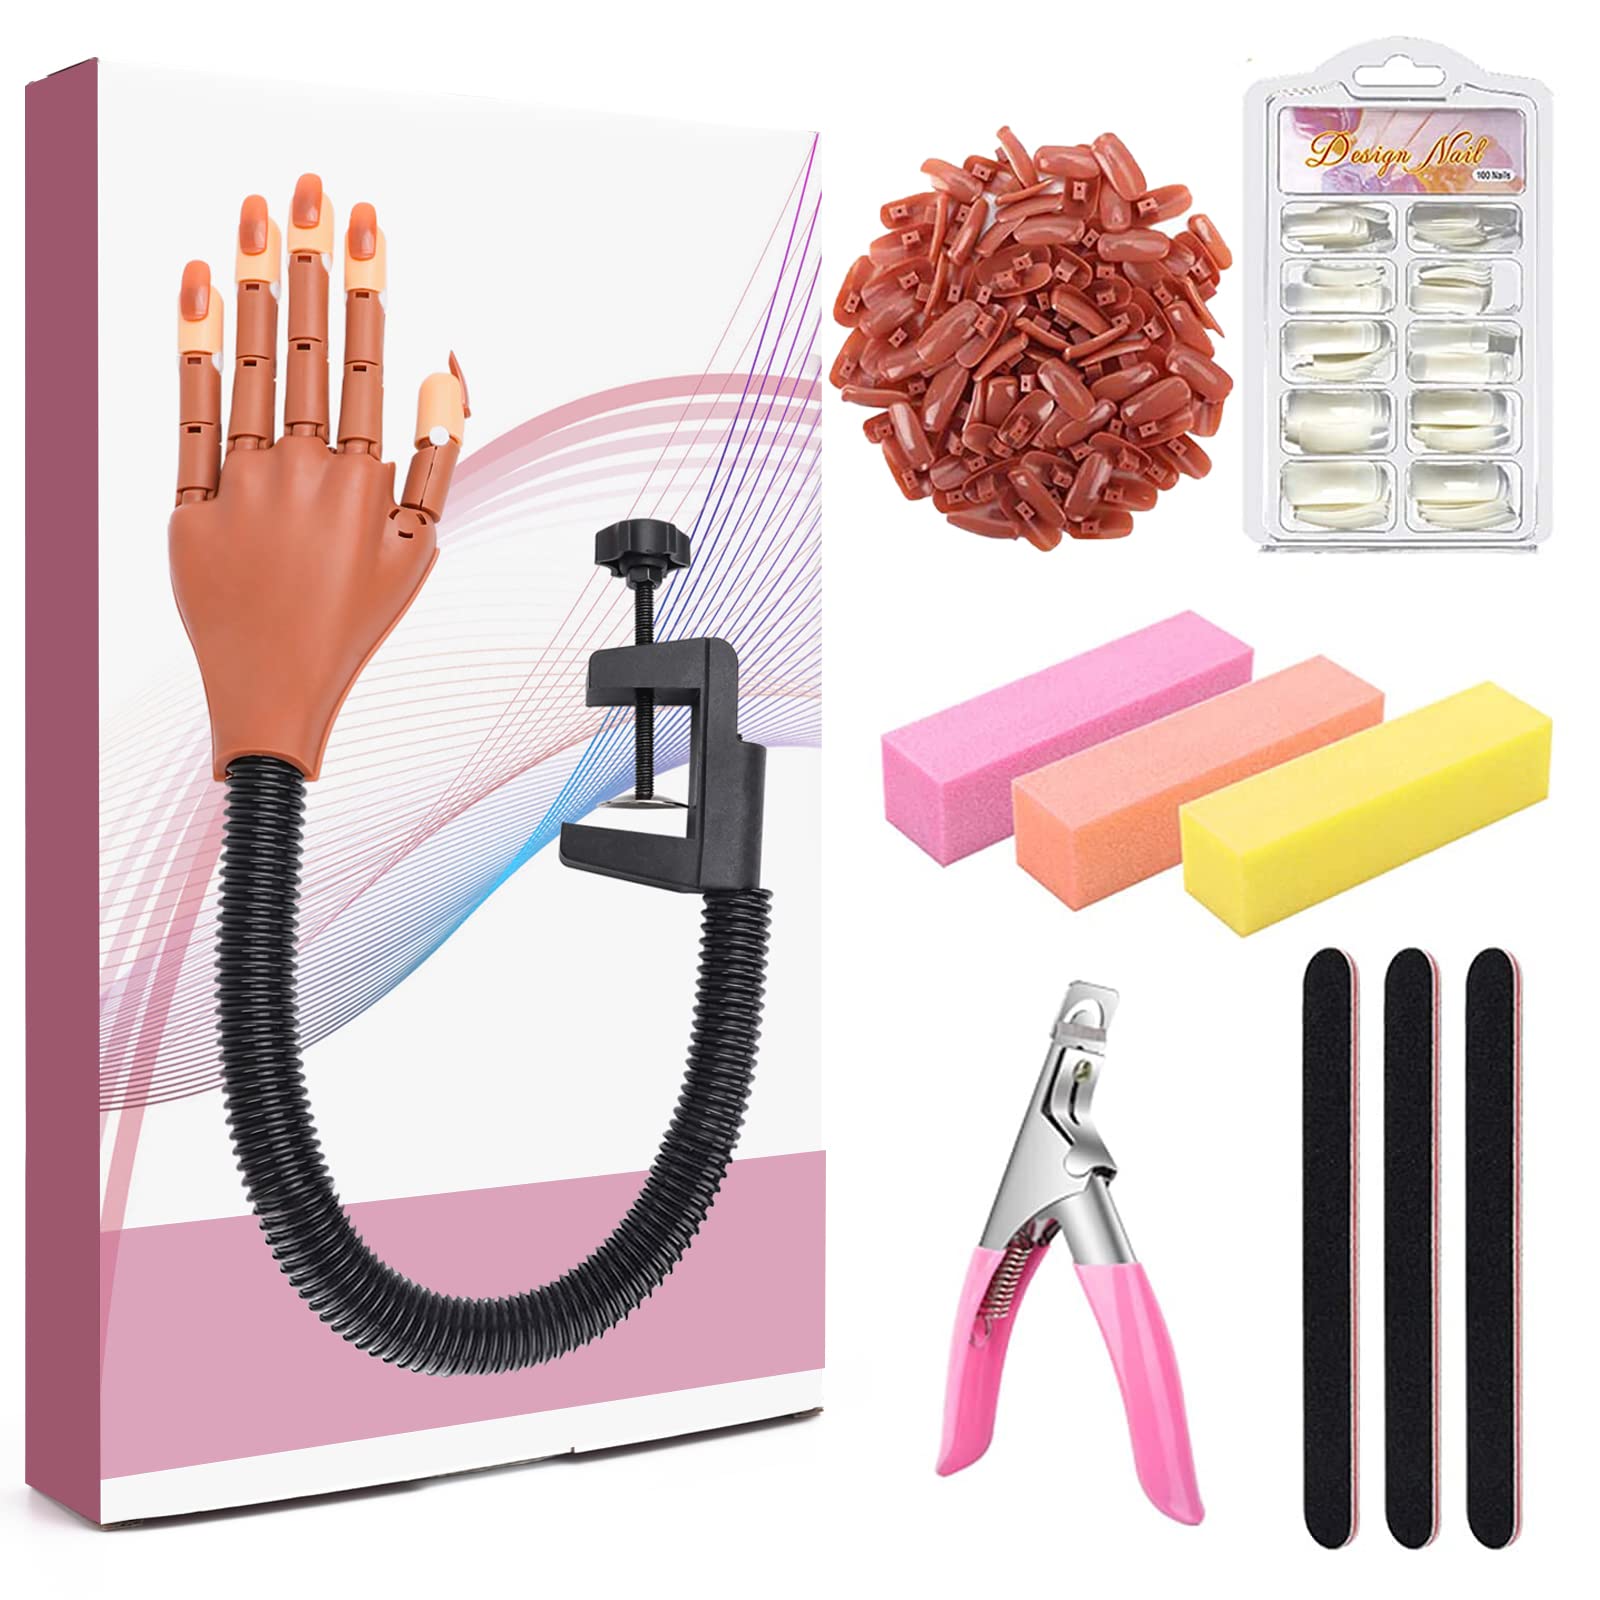 Practice Hand for Acrylic Nails, Adjustable Fake Mannequin Hands for ...